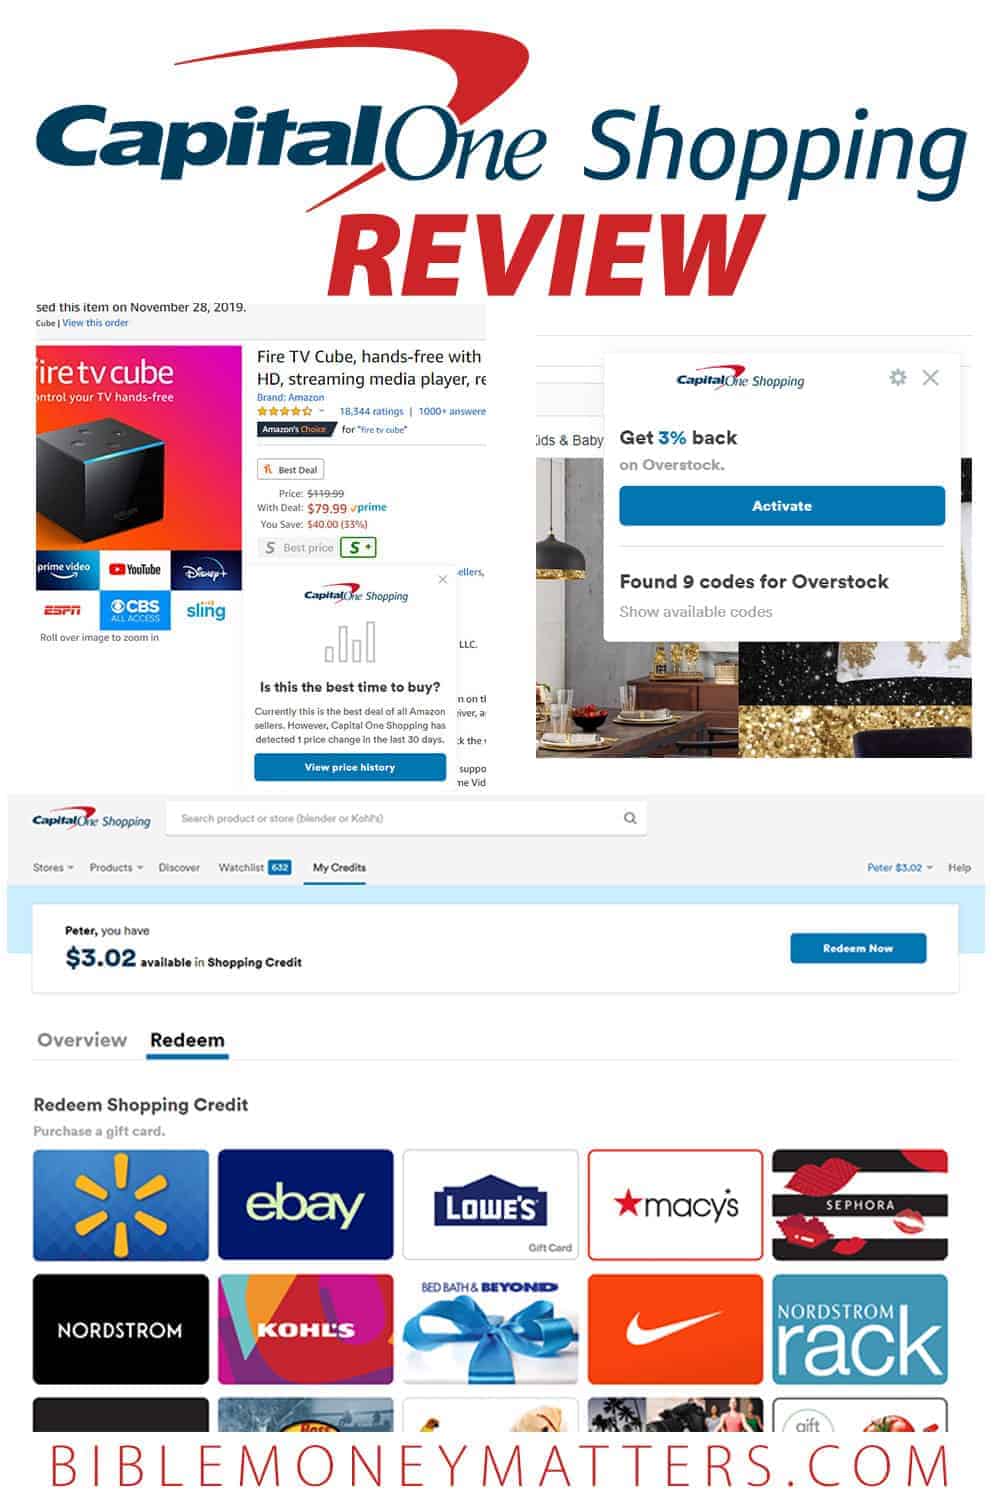 Capital One Shopping Review: A Tool To Save Money Shopping Online